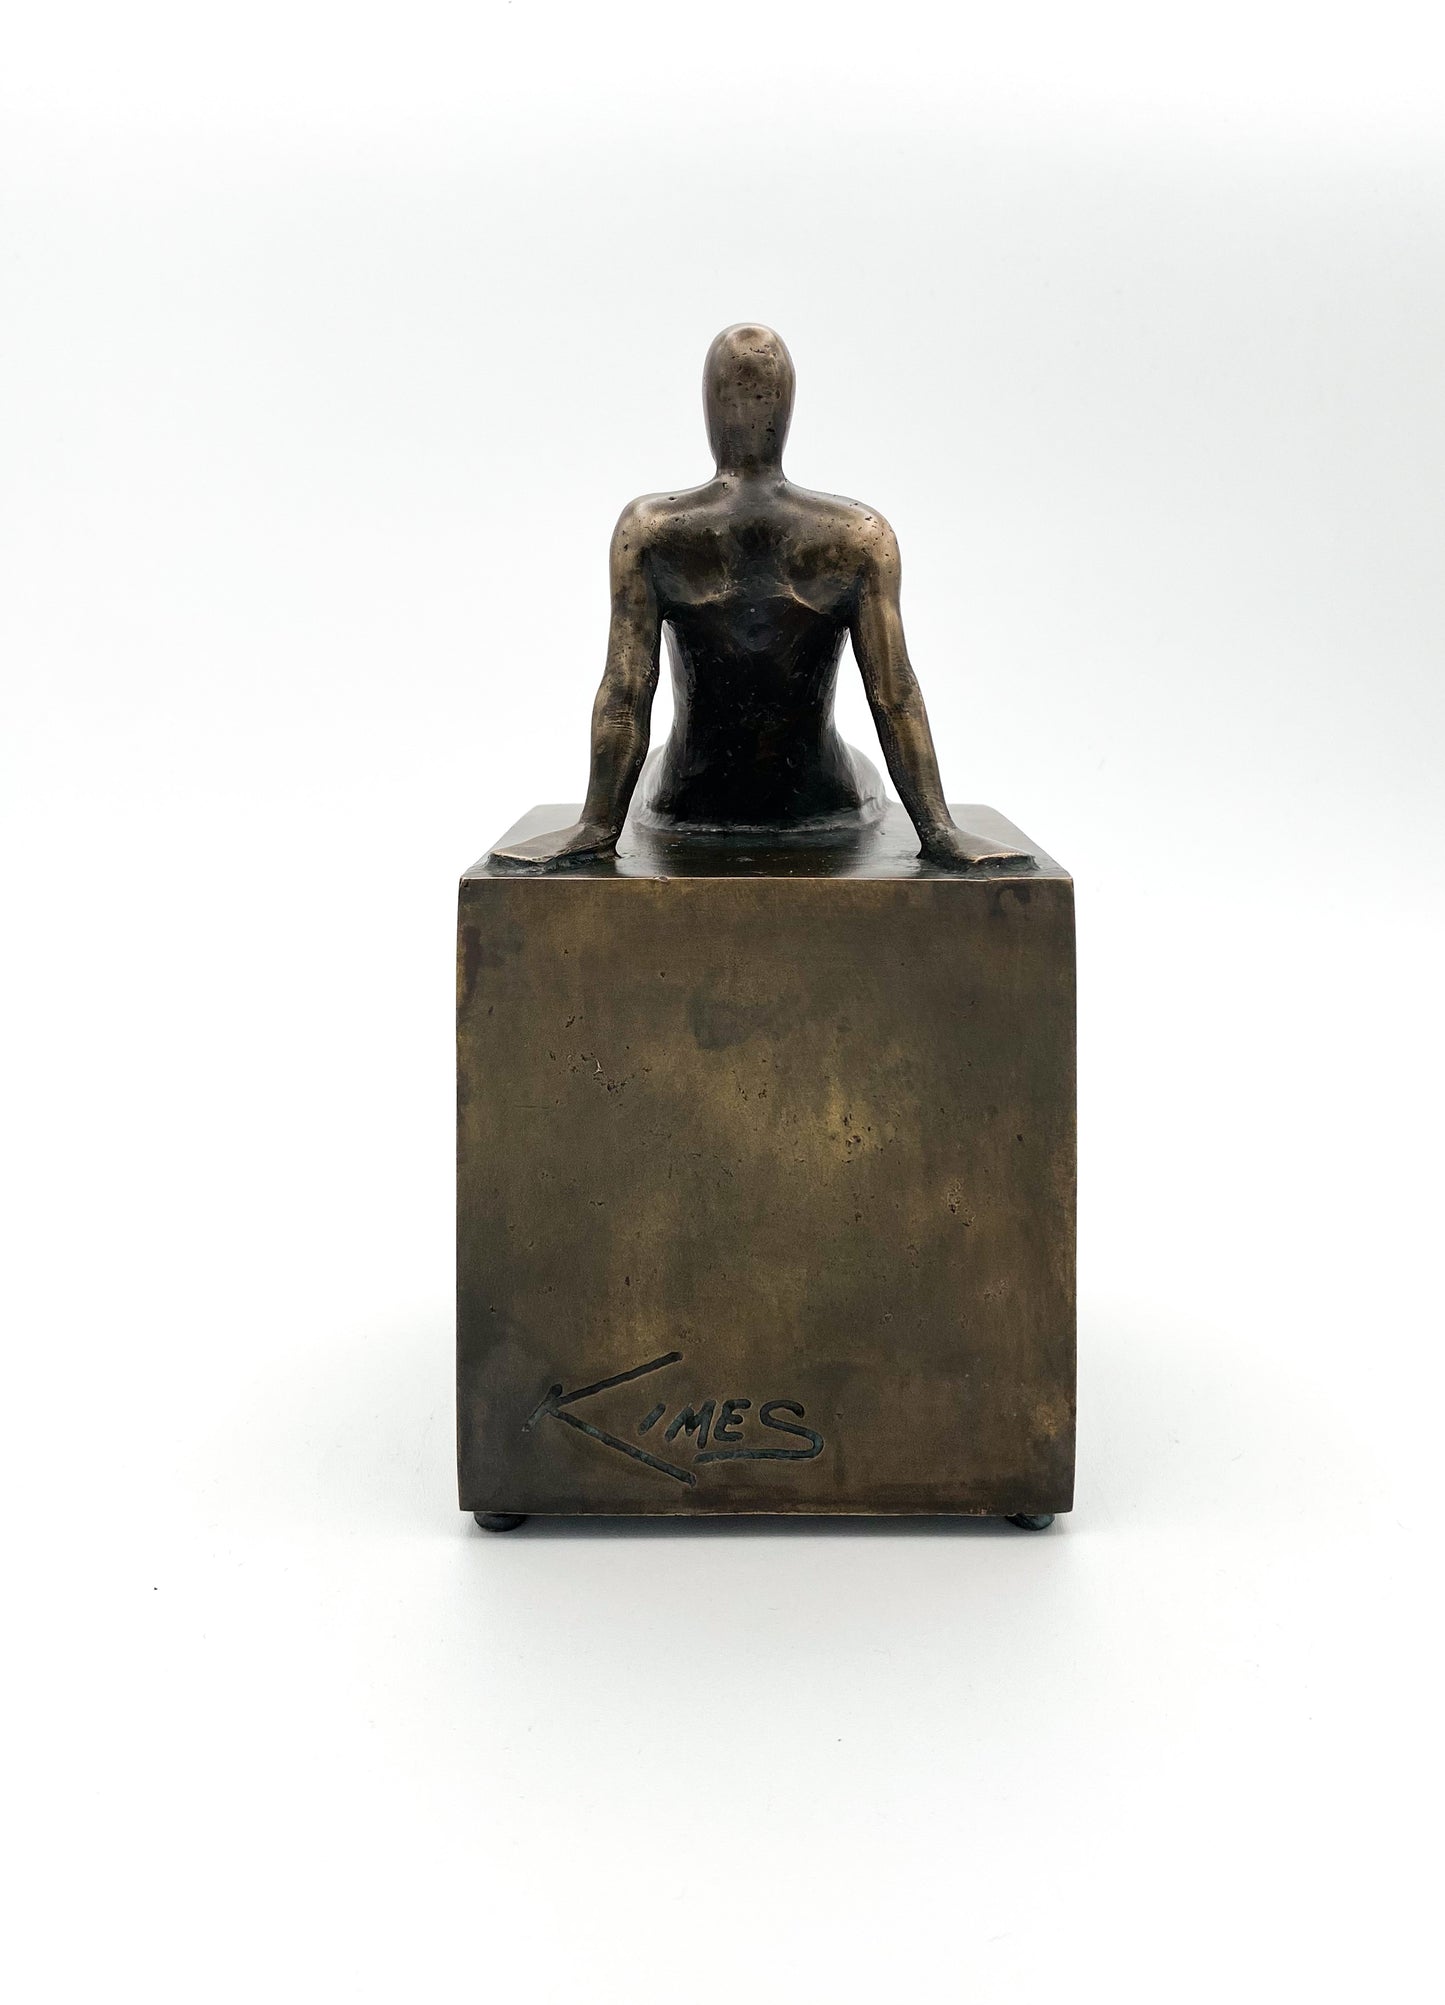 Maquette Series I - At Rest